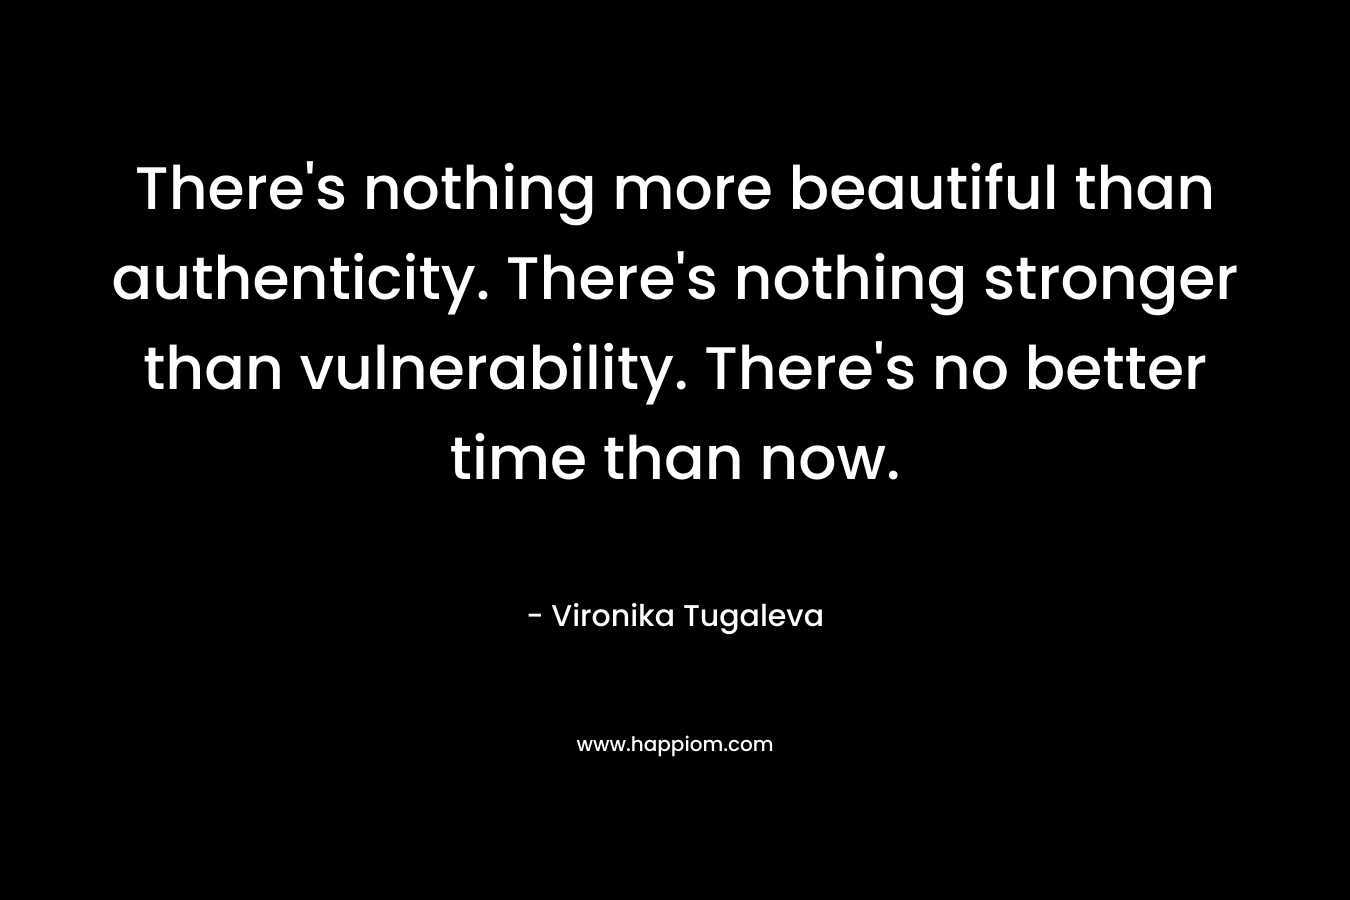 There's nothing more beautiful than authenticity. There's nothing stronger than vulnerability. There's no better time than now.